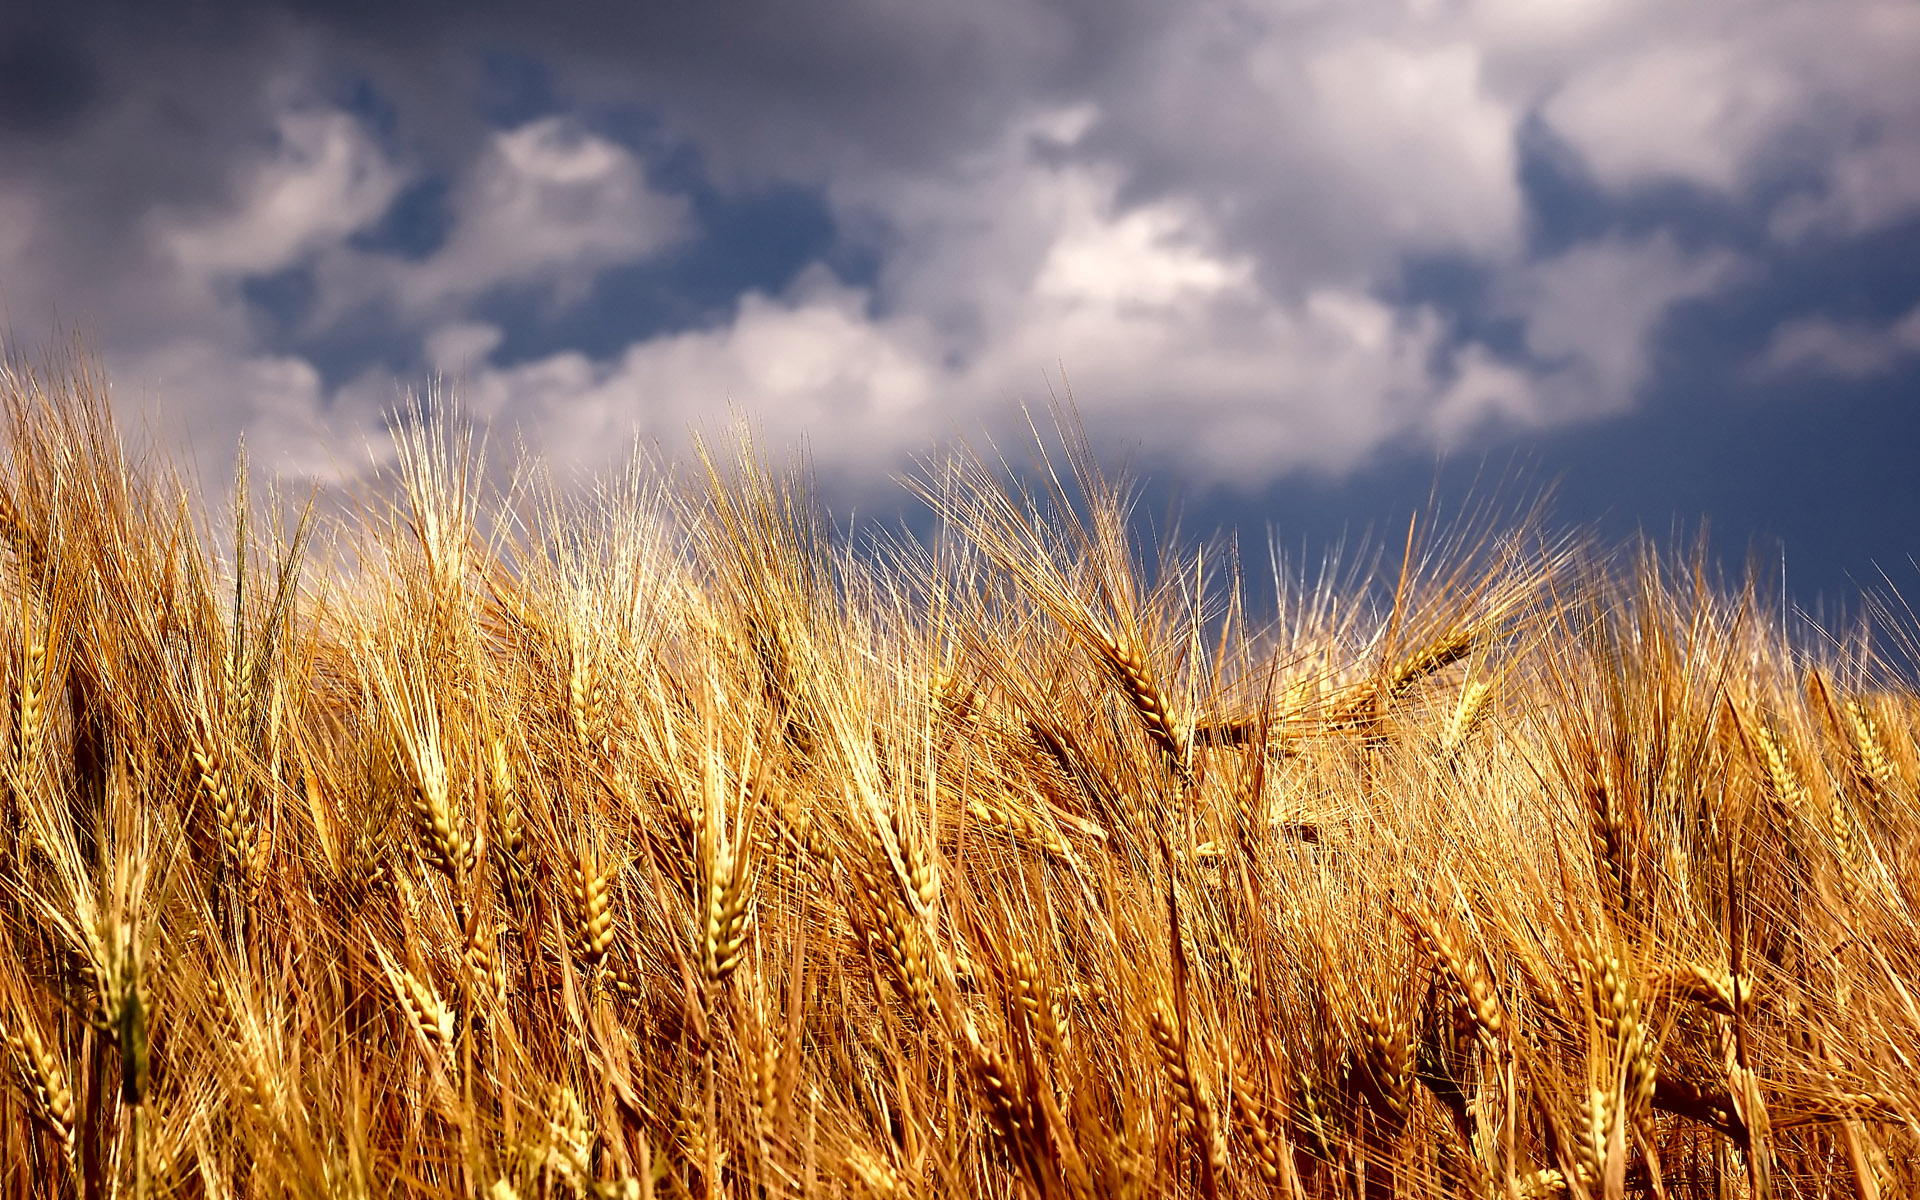 Research Raises Concerns About Global Crop Yield Projections